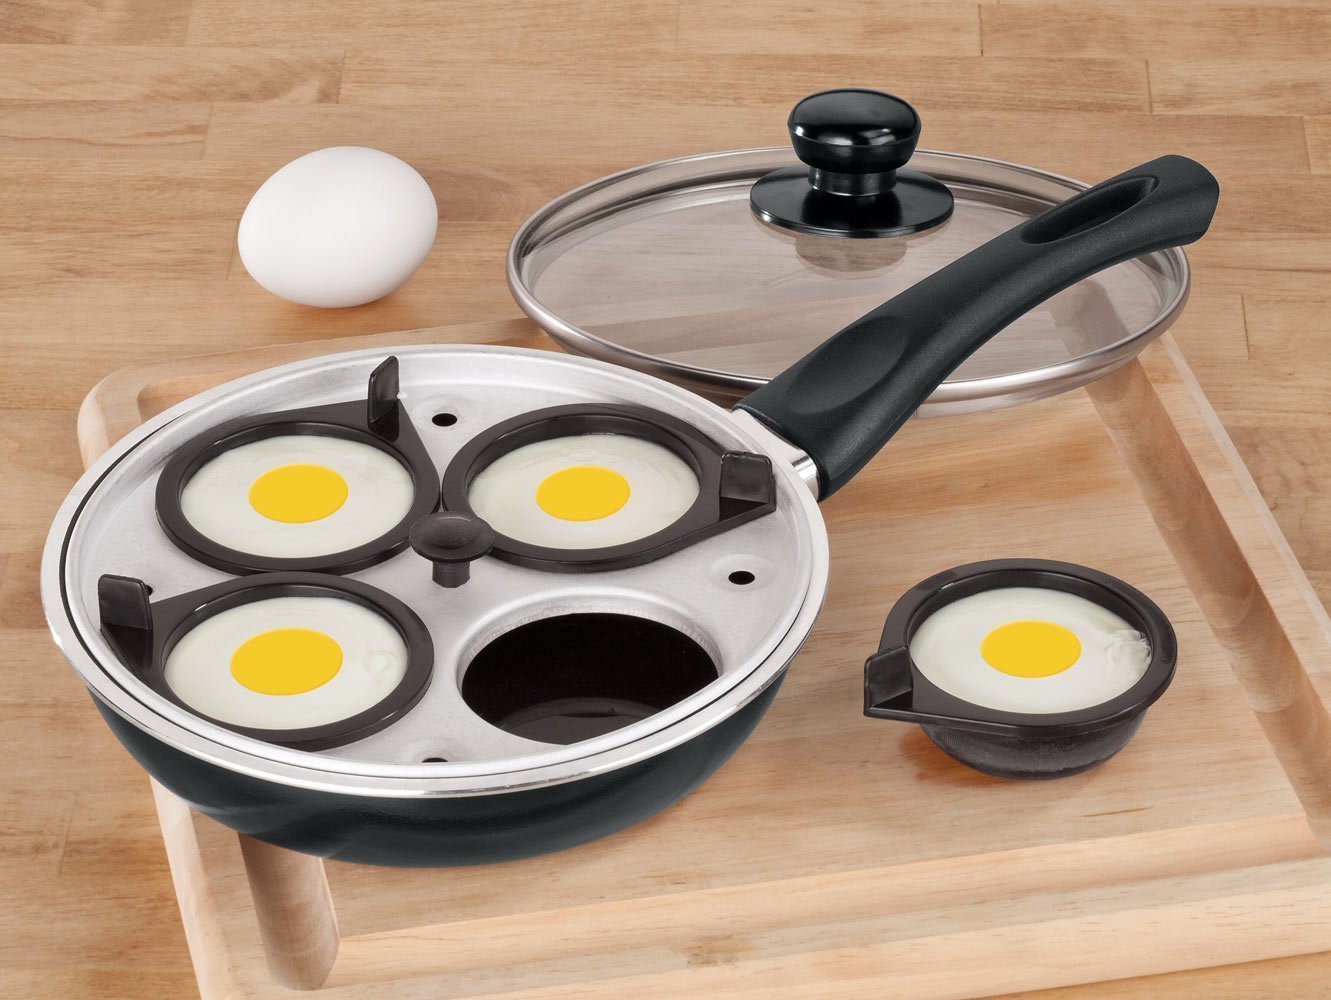 WalterDrake Frying Pan with Egg Poacher Insert, Black, One Size Fits All